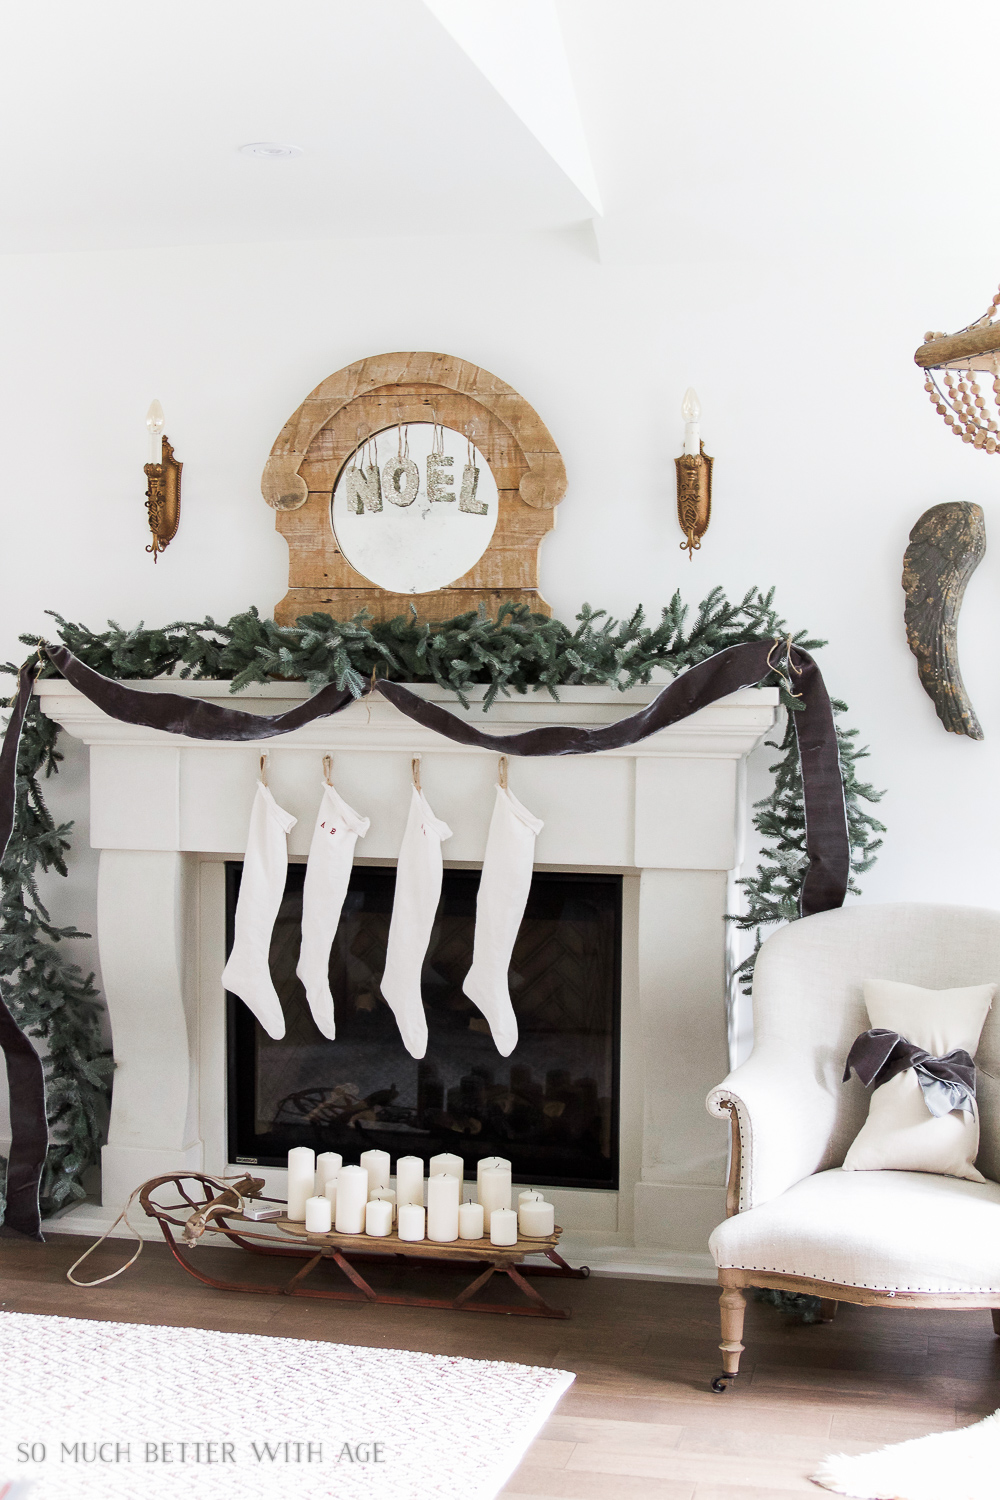 How to Change Christmas Decor Each Year Without Buying New